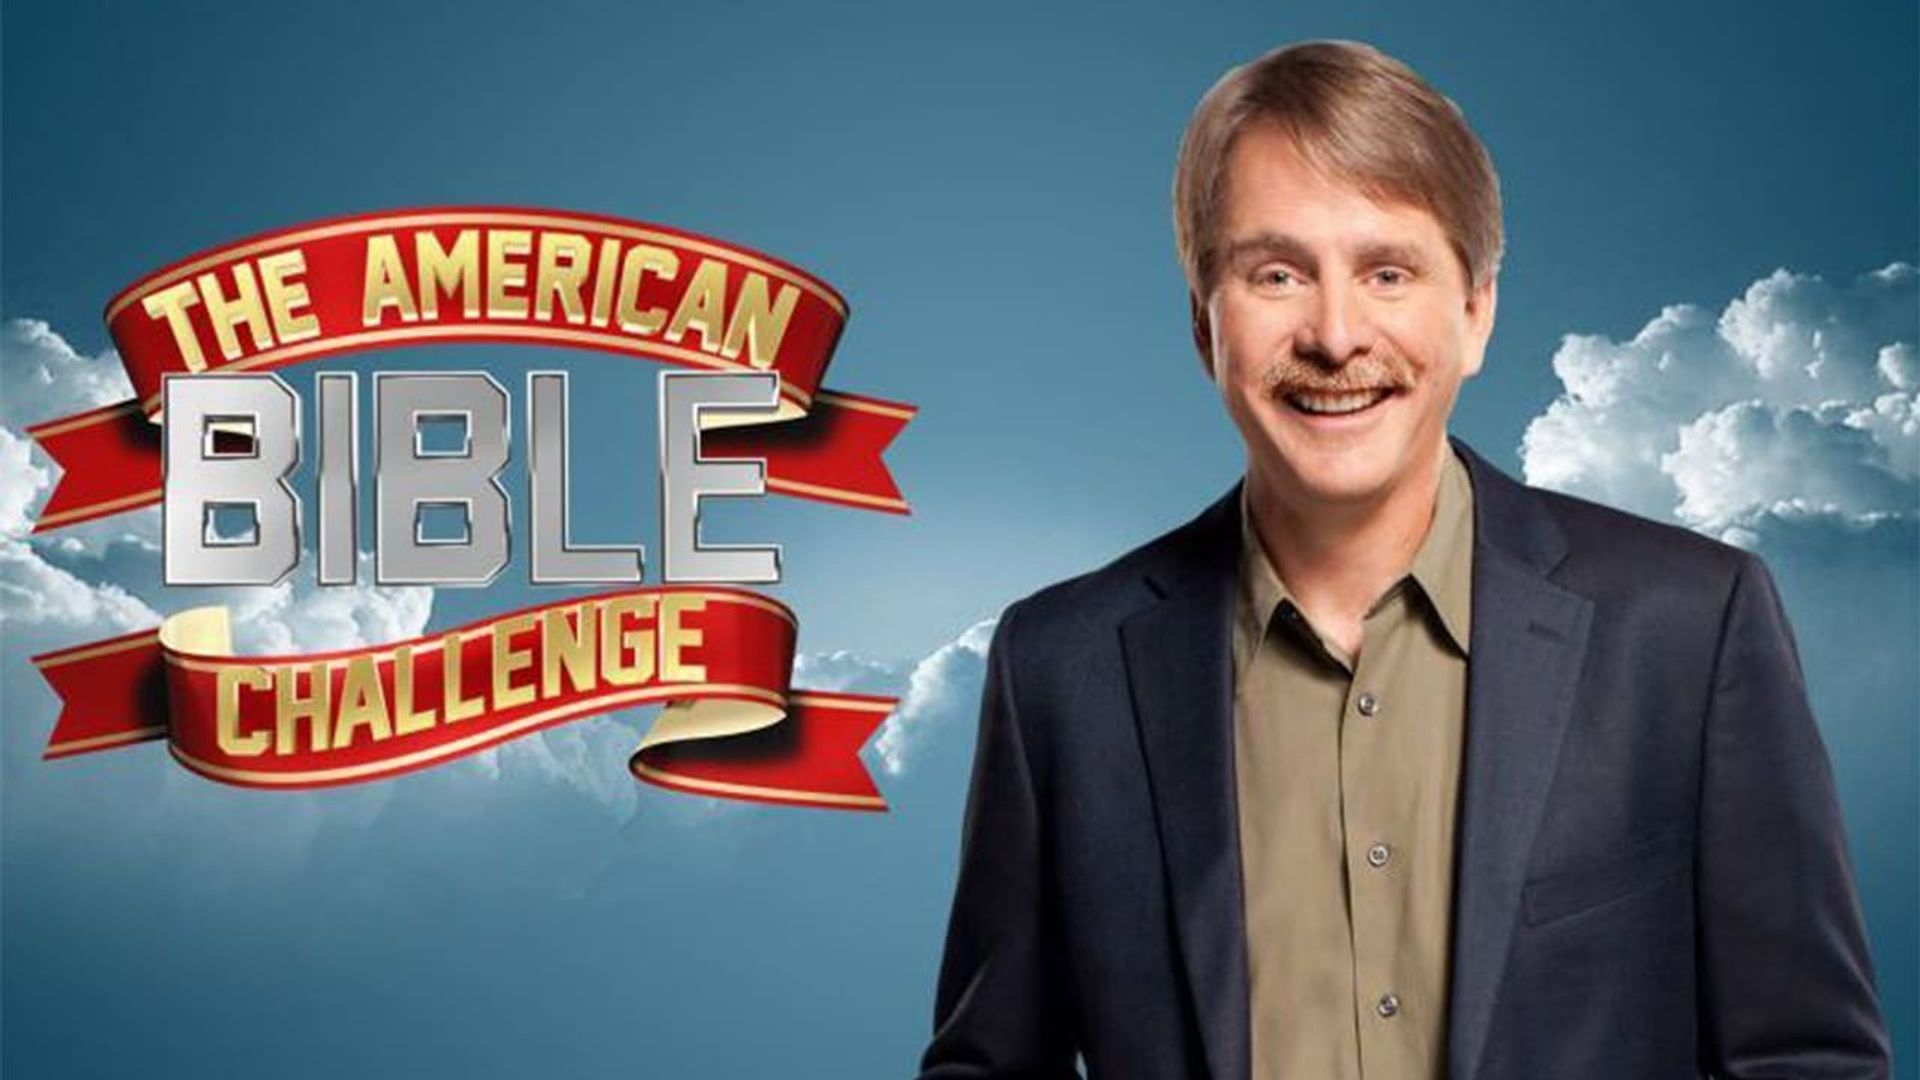 The American Bible Challenge background